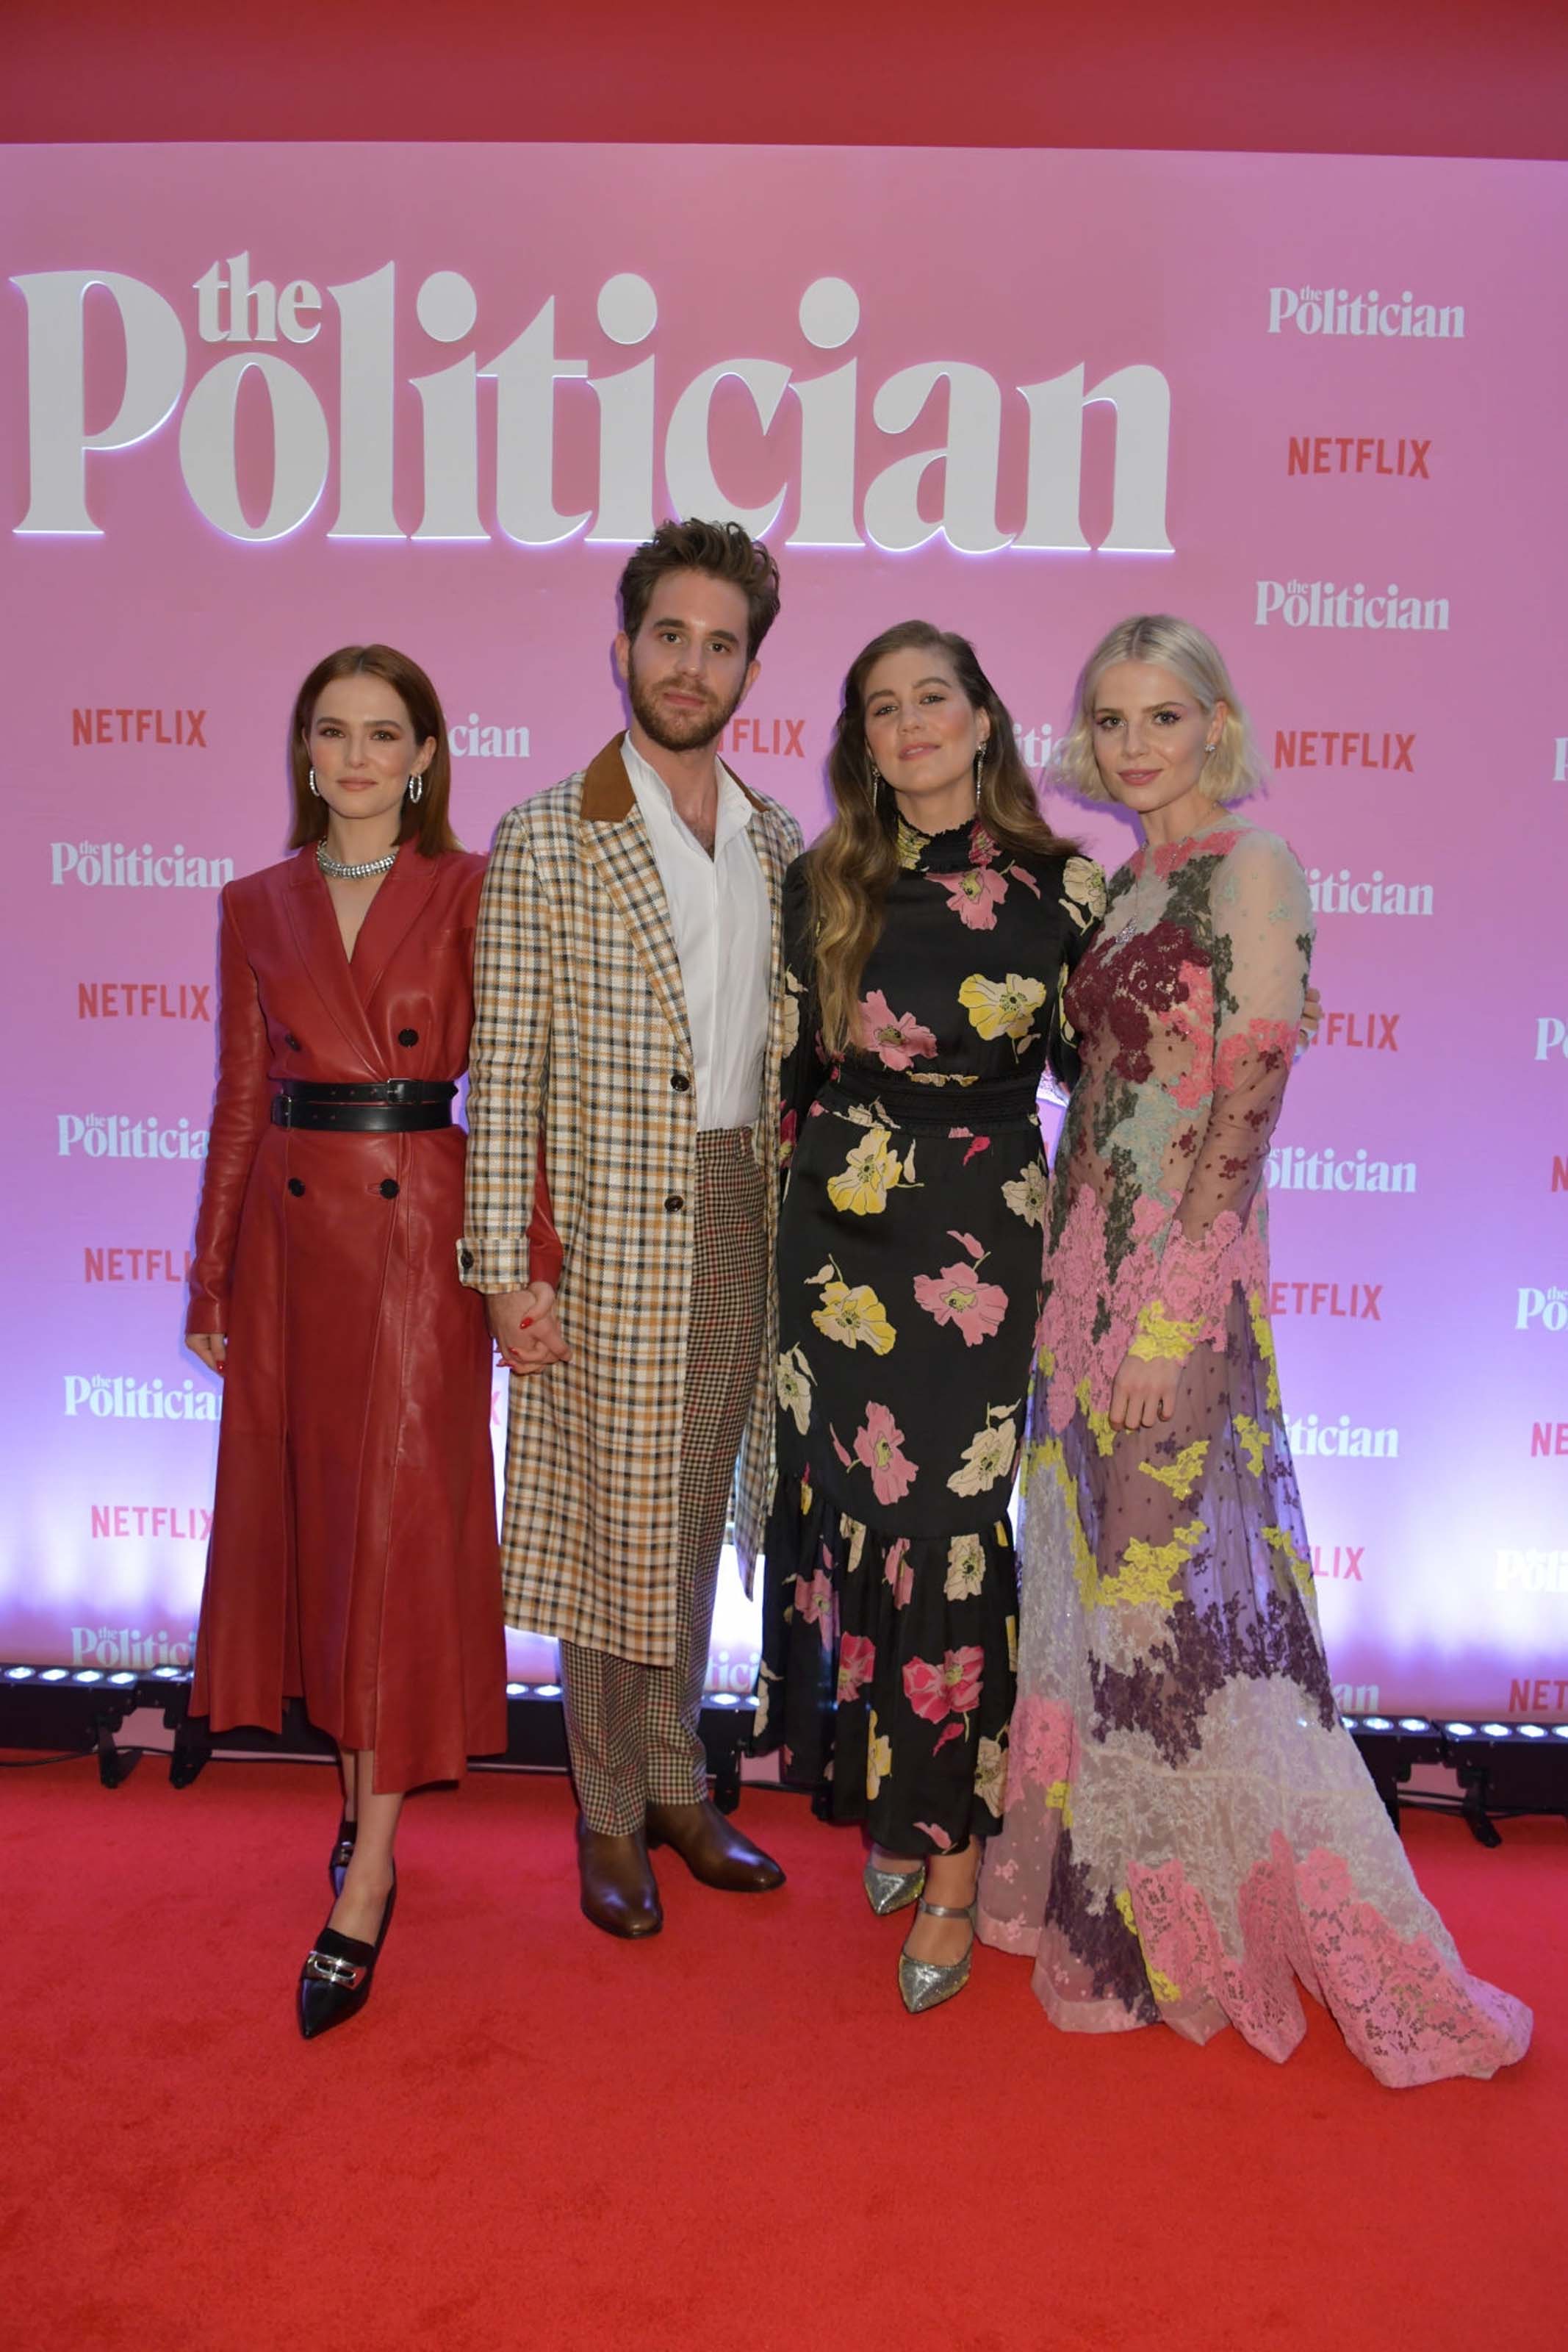 Zoey Deutch attends a Netflix special screening of “The Politician”